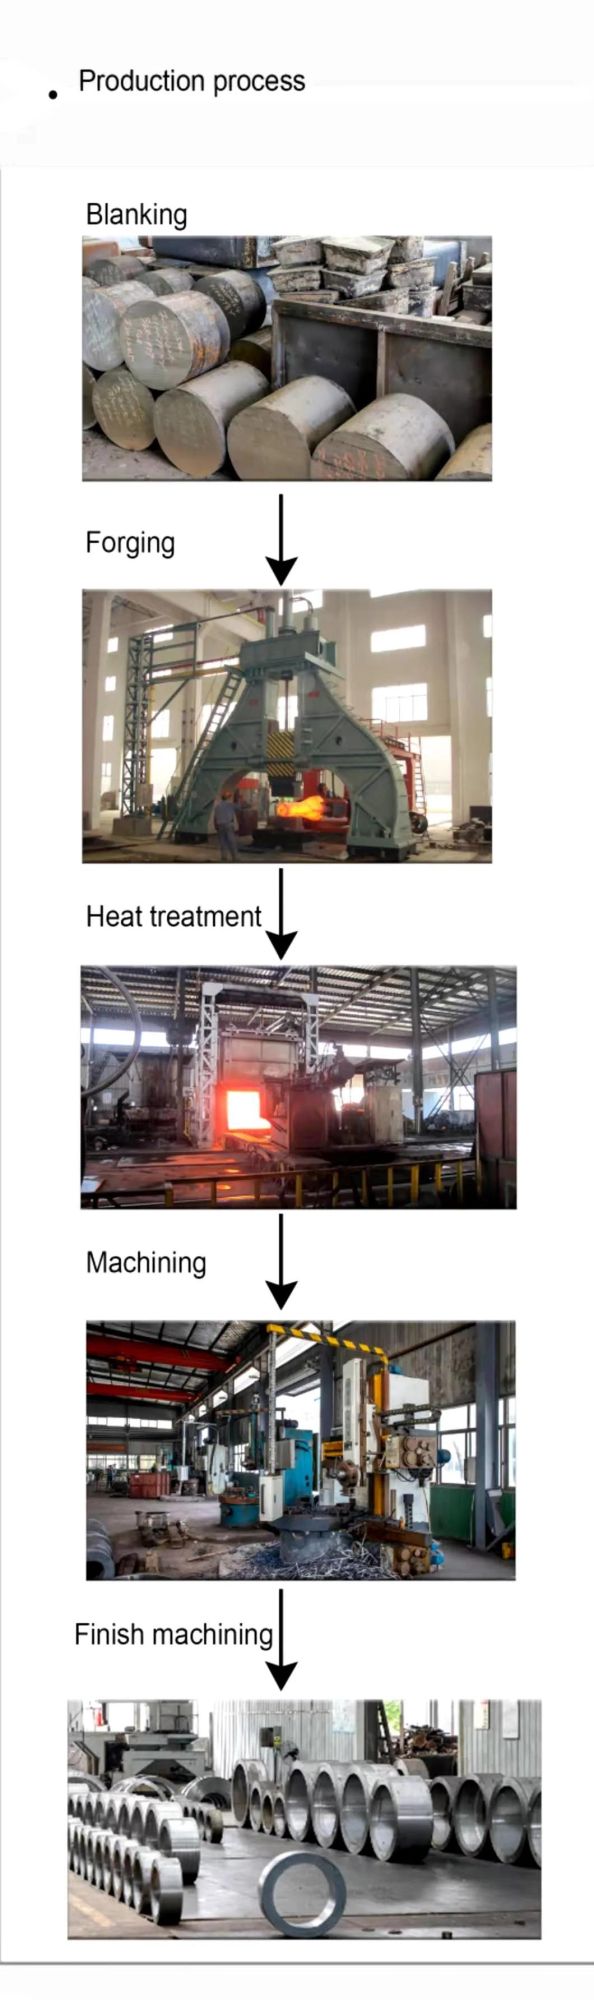 Stainless Steel, Heat-Resistant Steel, and Wear-Resistant Steel for Electrical Machinery